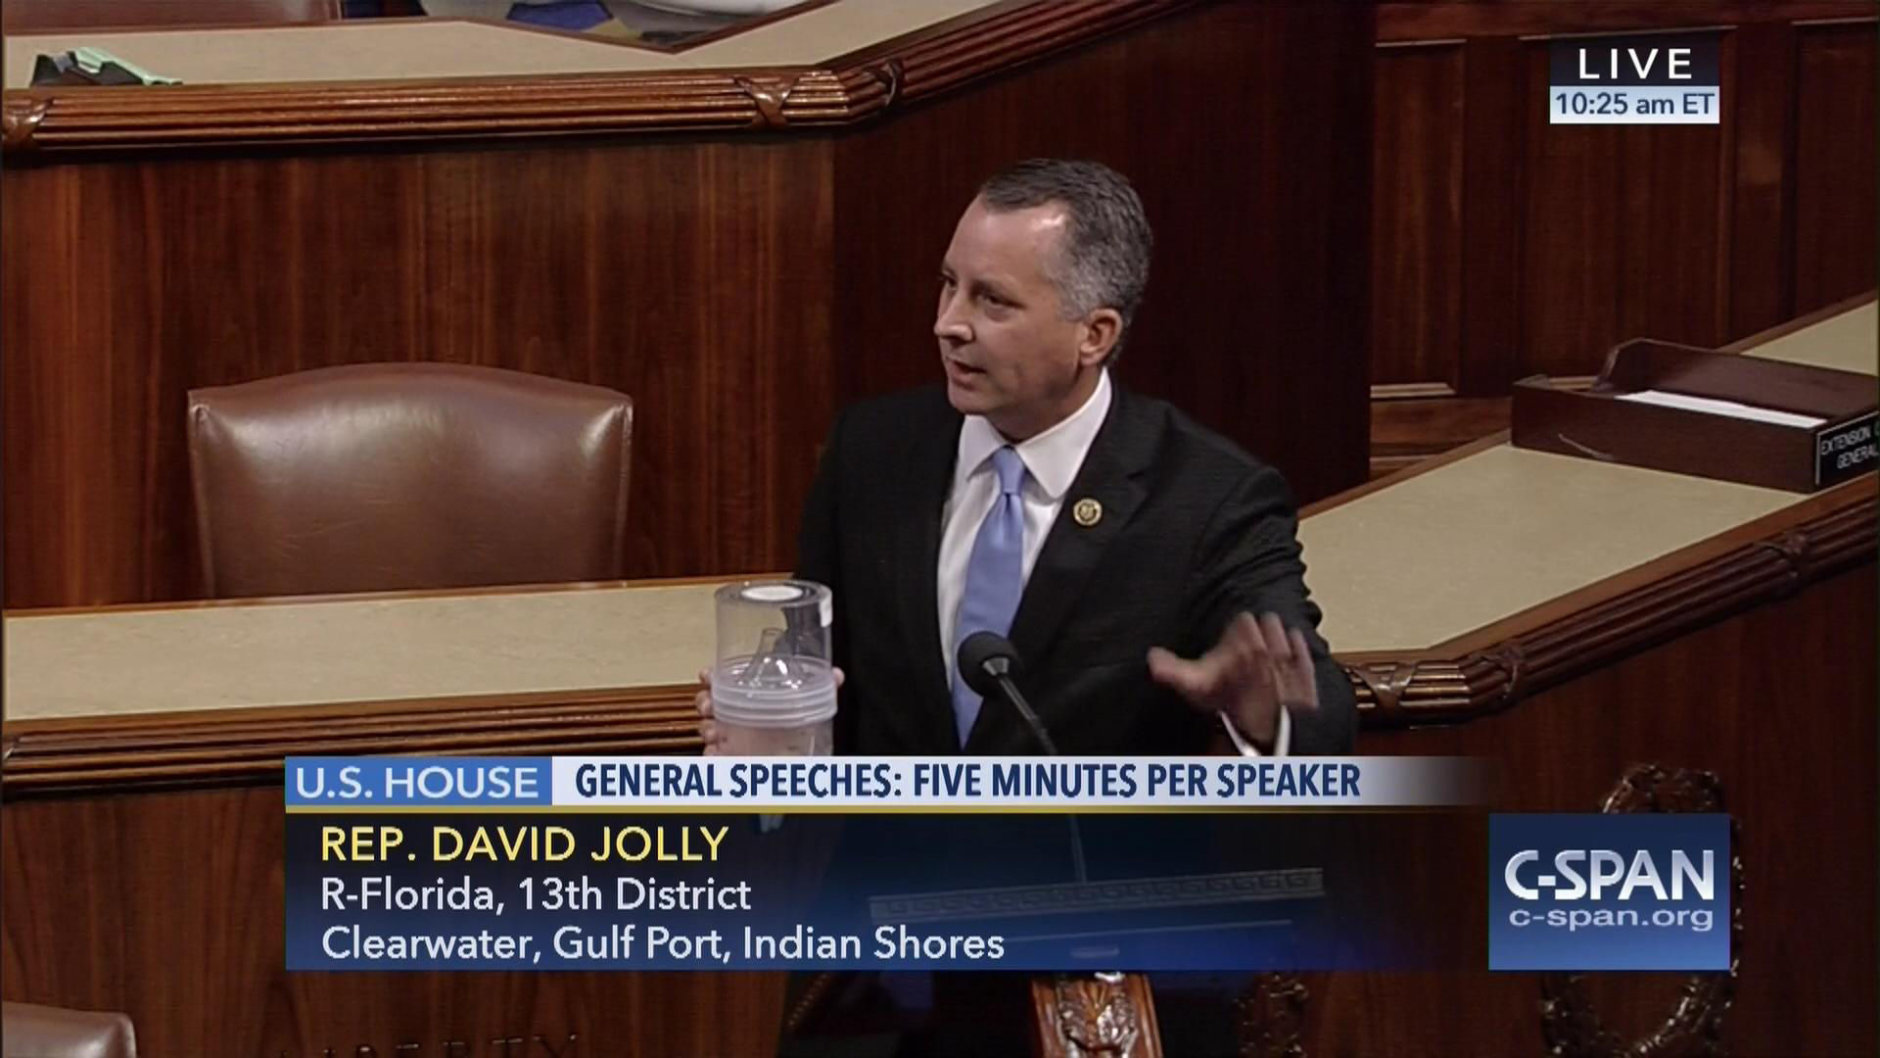 In this frame grab from video provided by C-SPAN, Rep. David Jolly, R-Fla. holds a container of mosquitoes while speaking of the House floor on Capitol Hill in Washington, Wednesday, Sept. 7, 2016. "The politics of Zika are garbage right now," the Florida lawmaker said in a short, angry speech condemning Congress for failing to pass legislation providing $1.1 billion to combat the mosquito-borne virus.  (C-SPAN via AP)